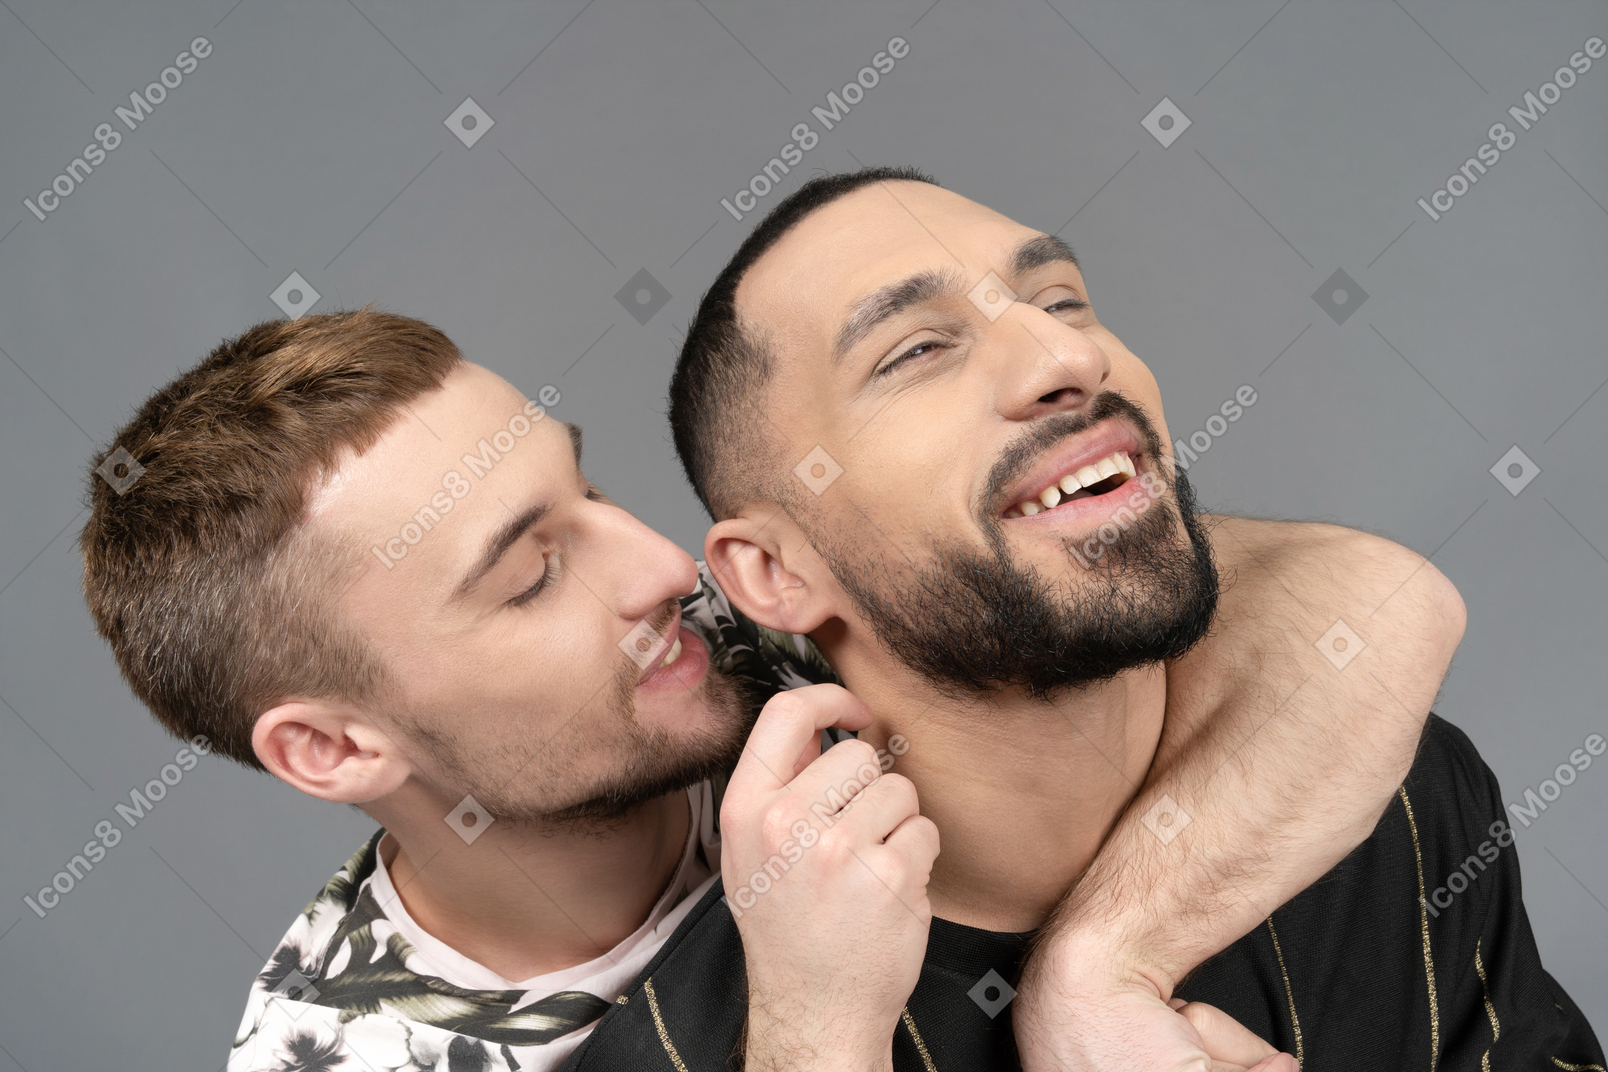 Portrait of a young man tickling his partner's neck while laughing